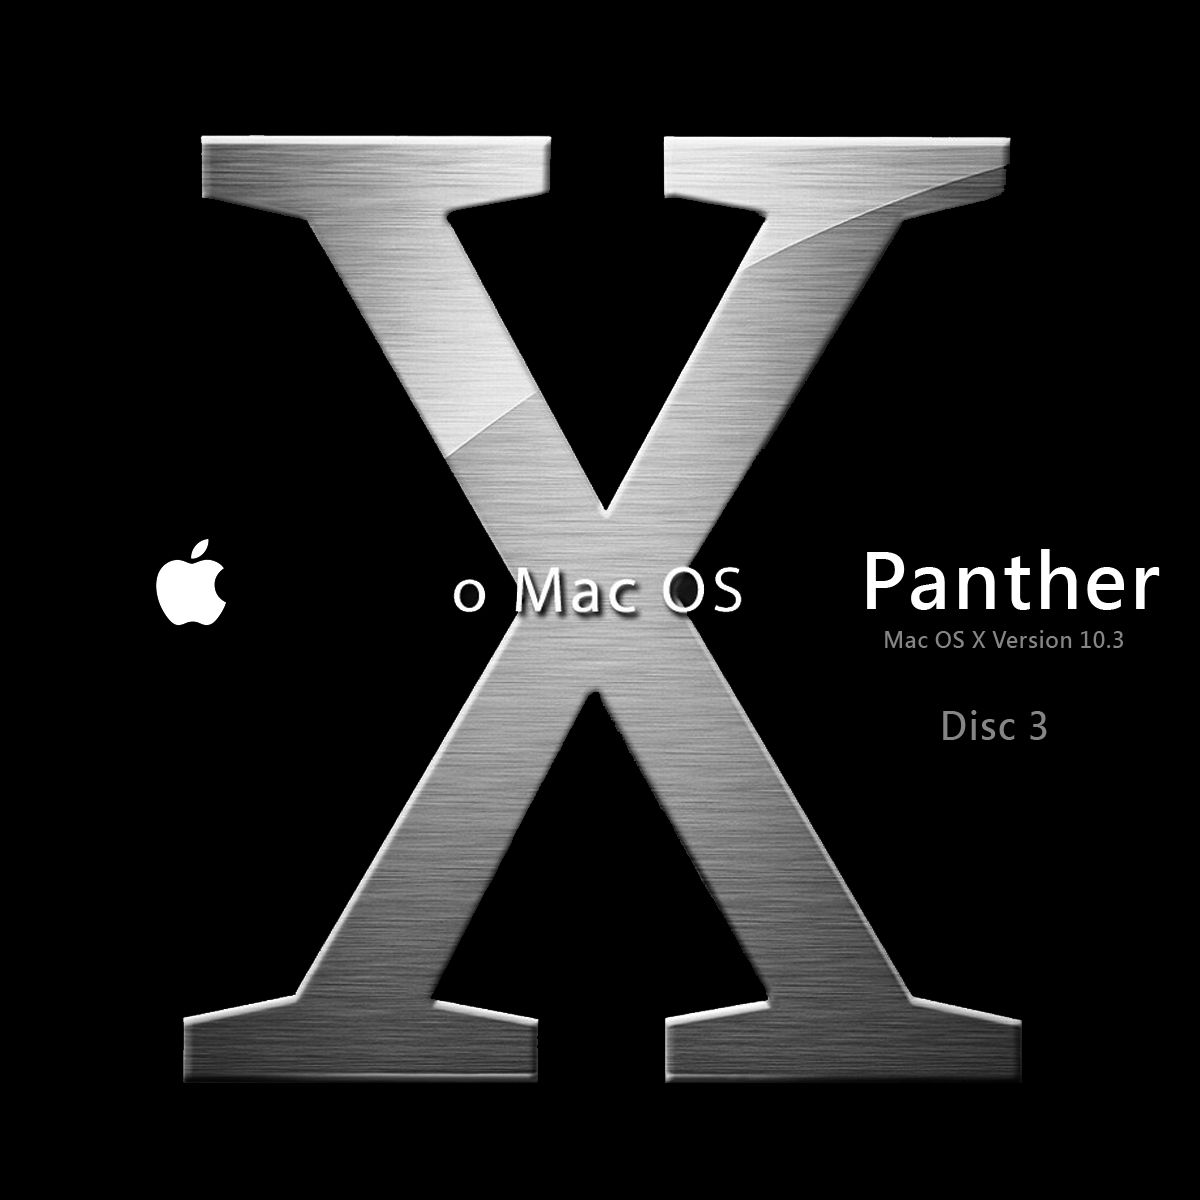 Games For Mac Os X Free Download Full Version